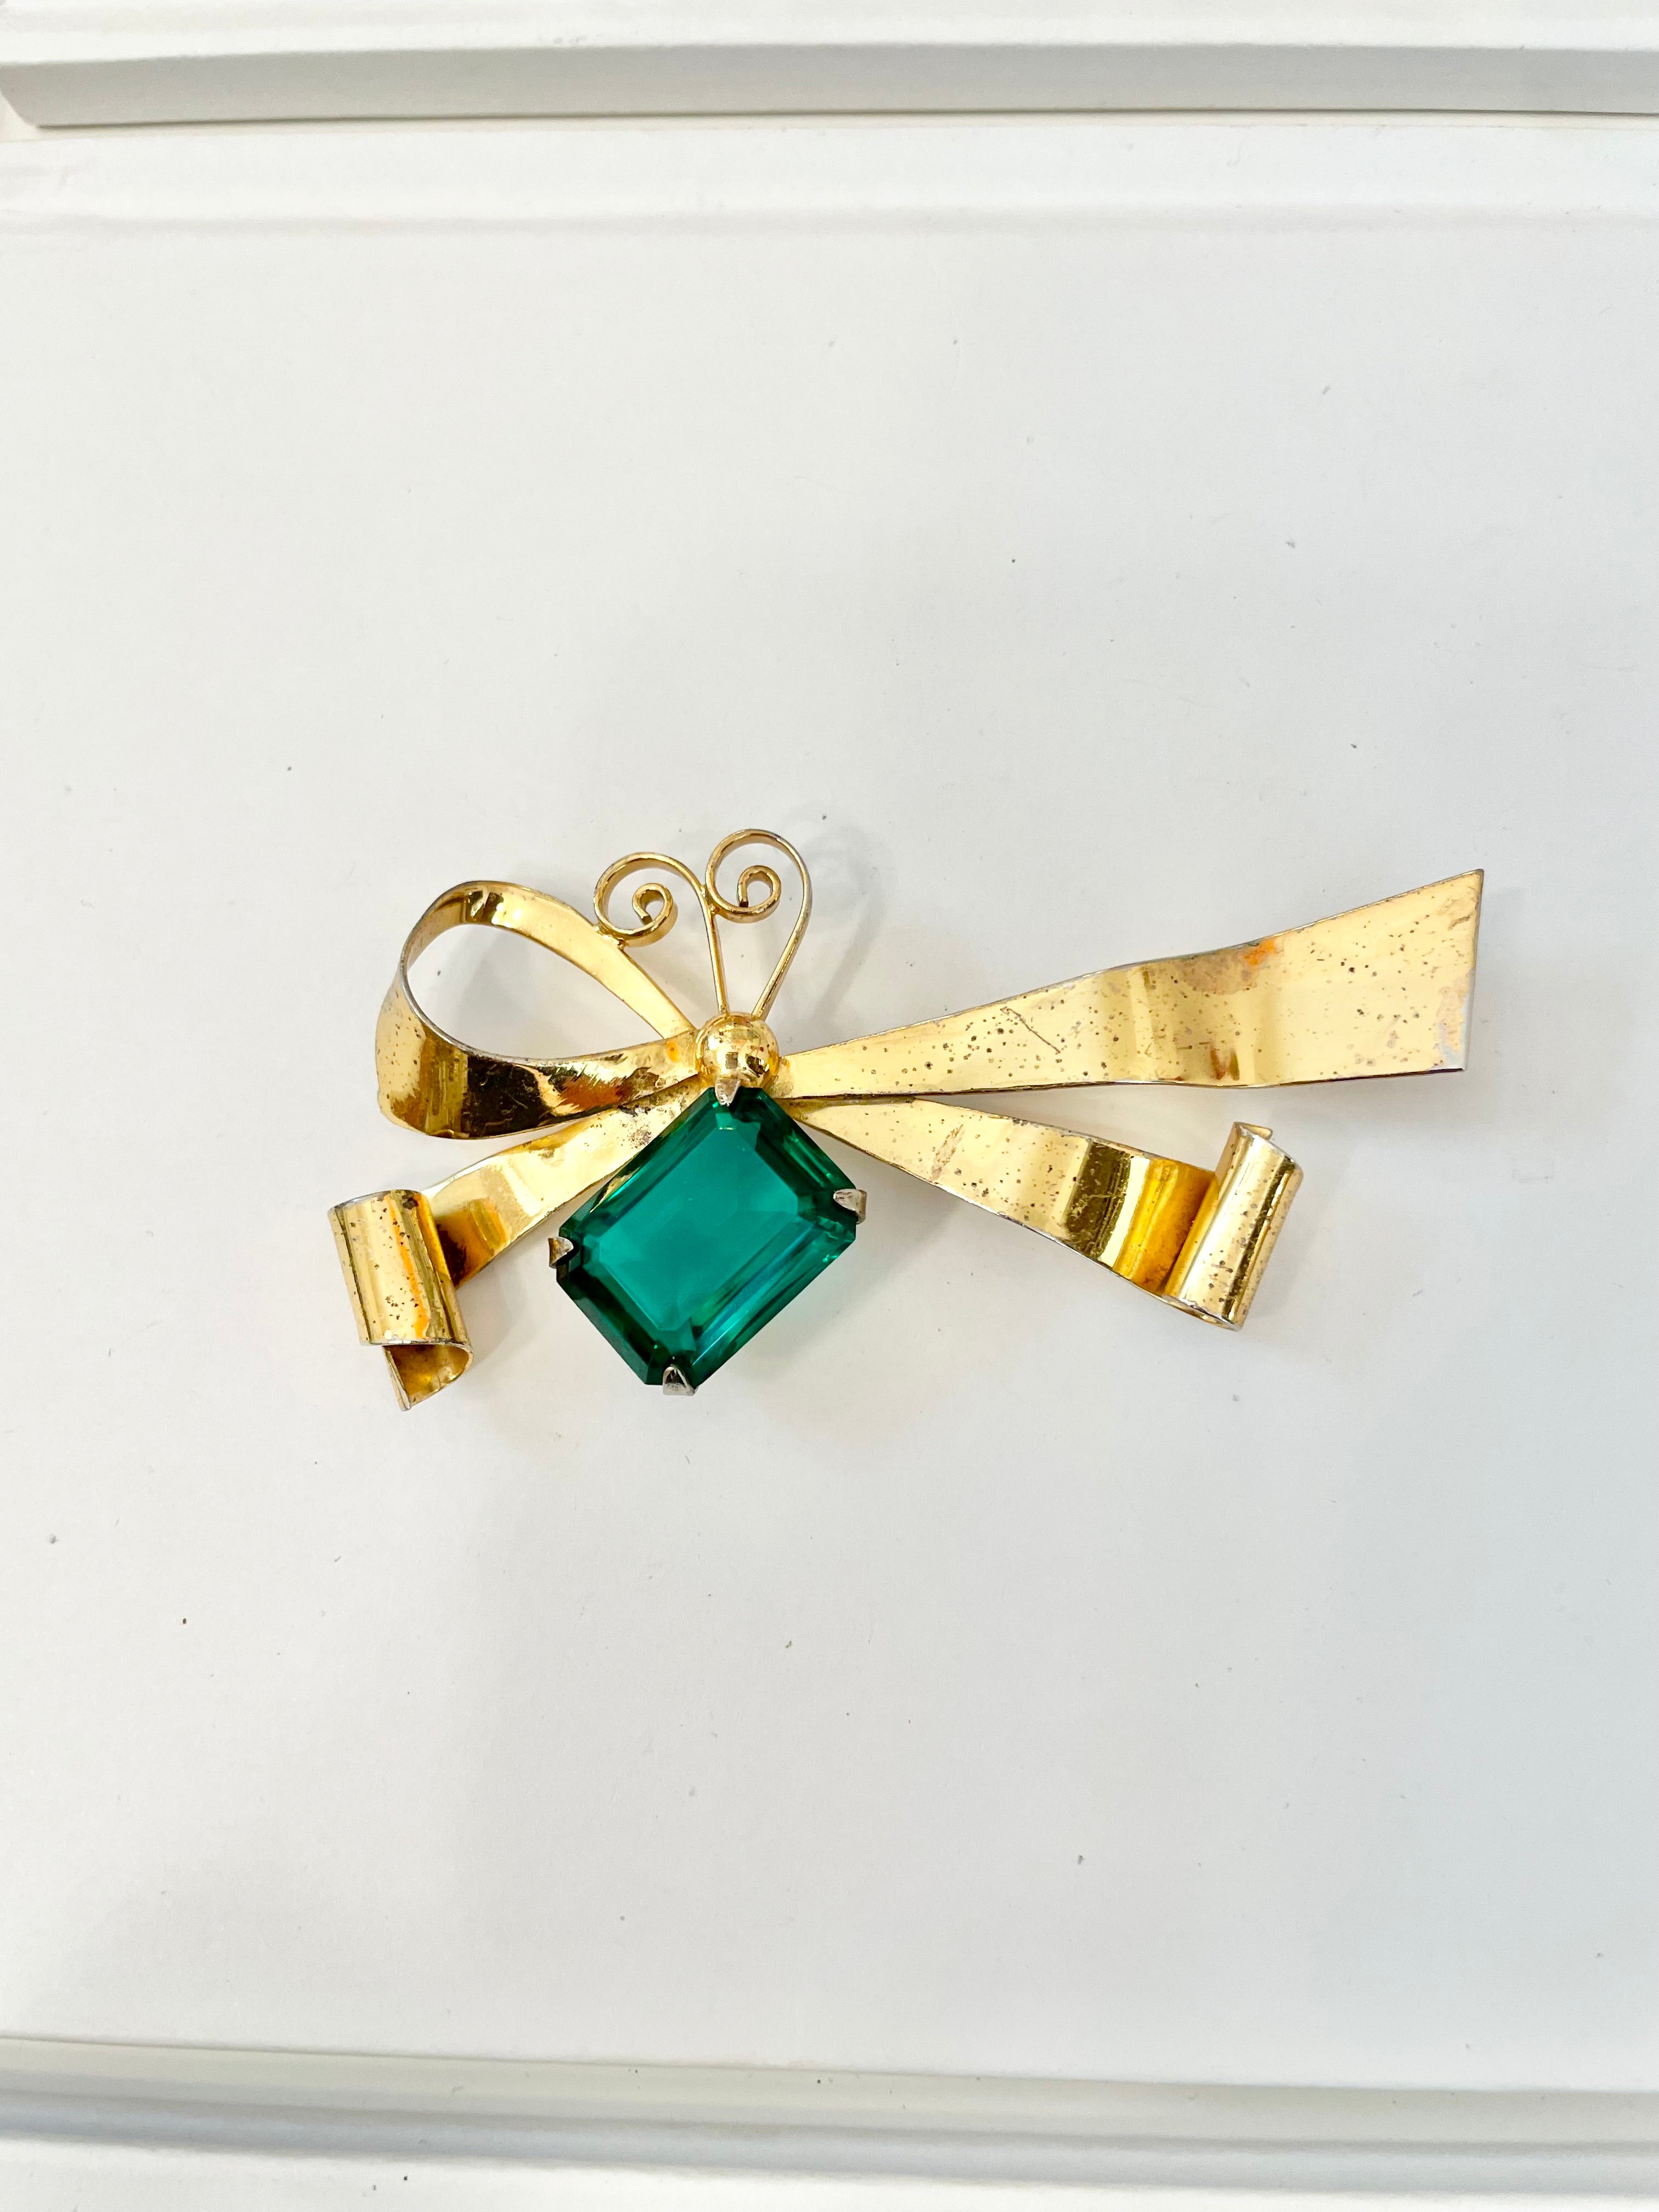 Absolutely stunning 1940's emerald glass chic brooch..... truly divine